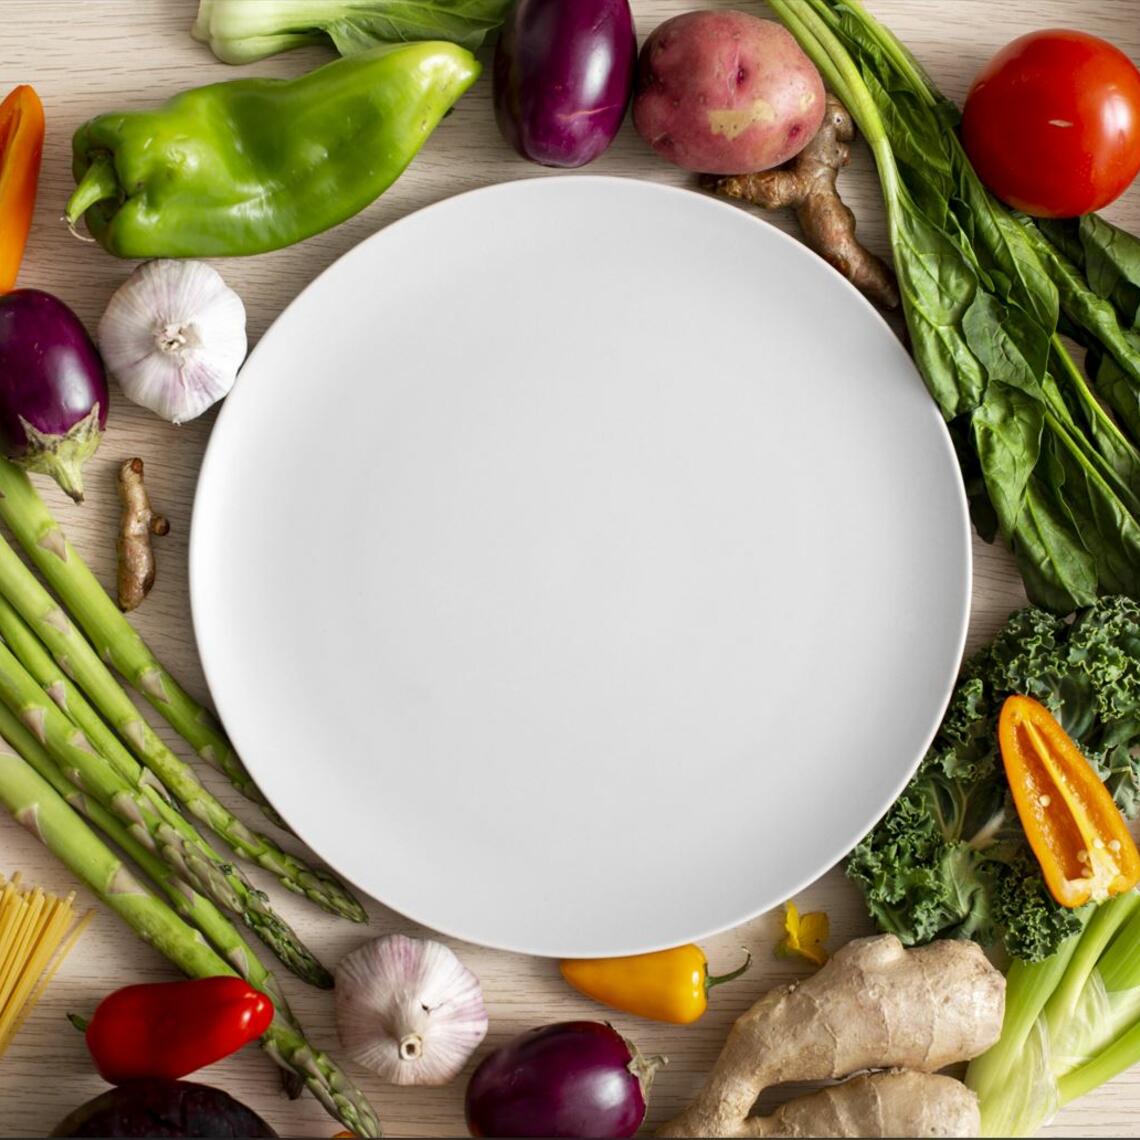 Top down image of empty white dinner plate surrounded by fresh vegetables